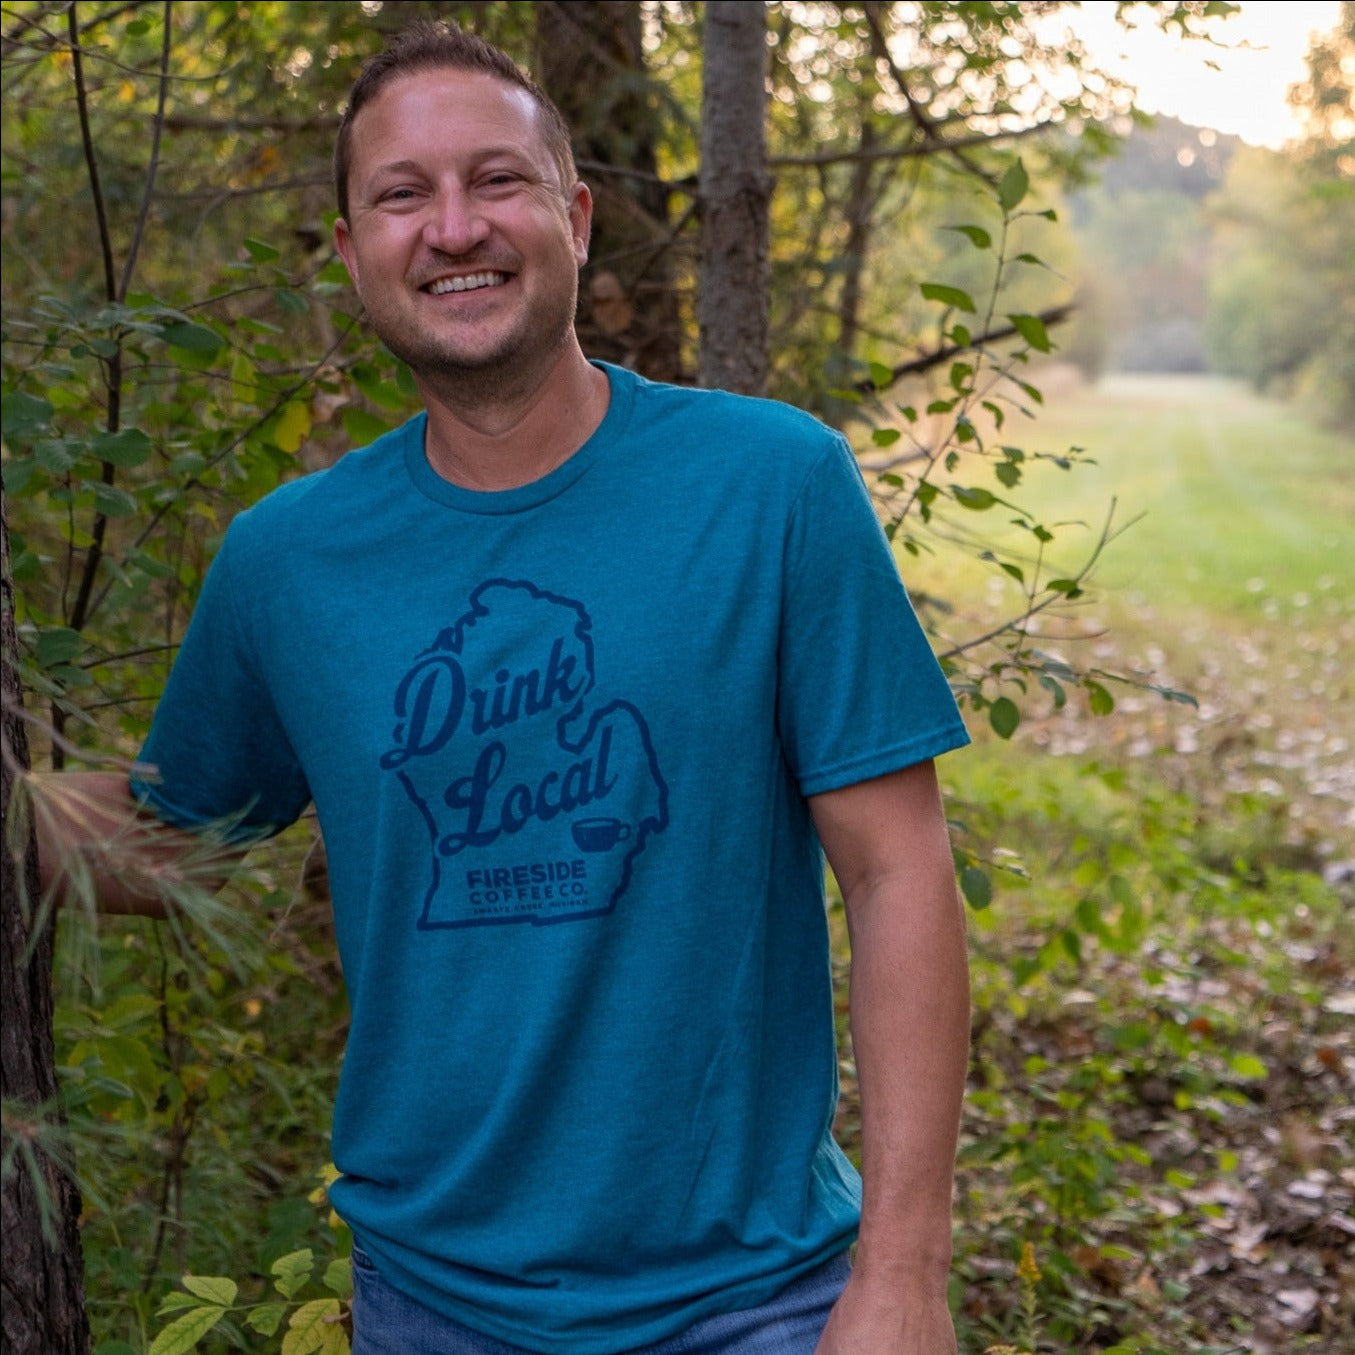 "Drink Local" T-Shirt - Teal